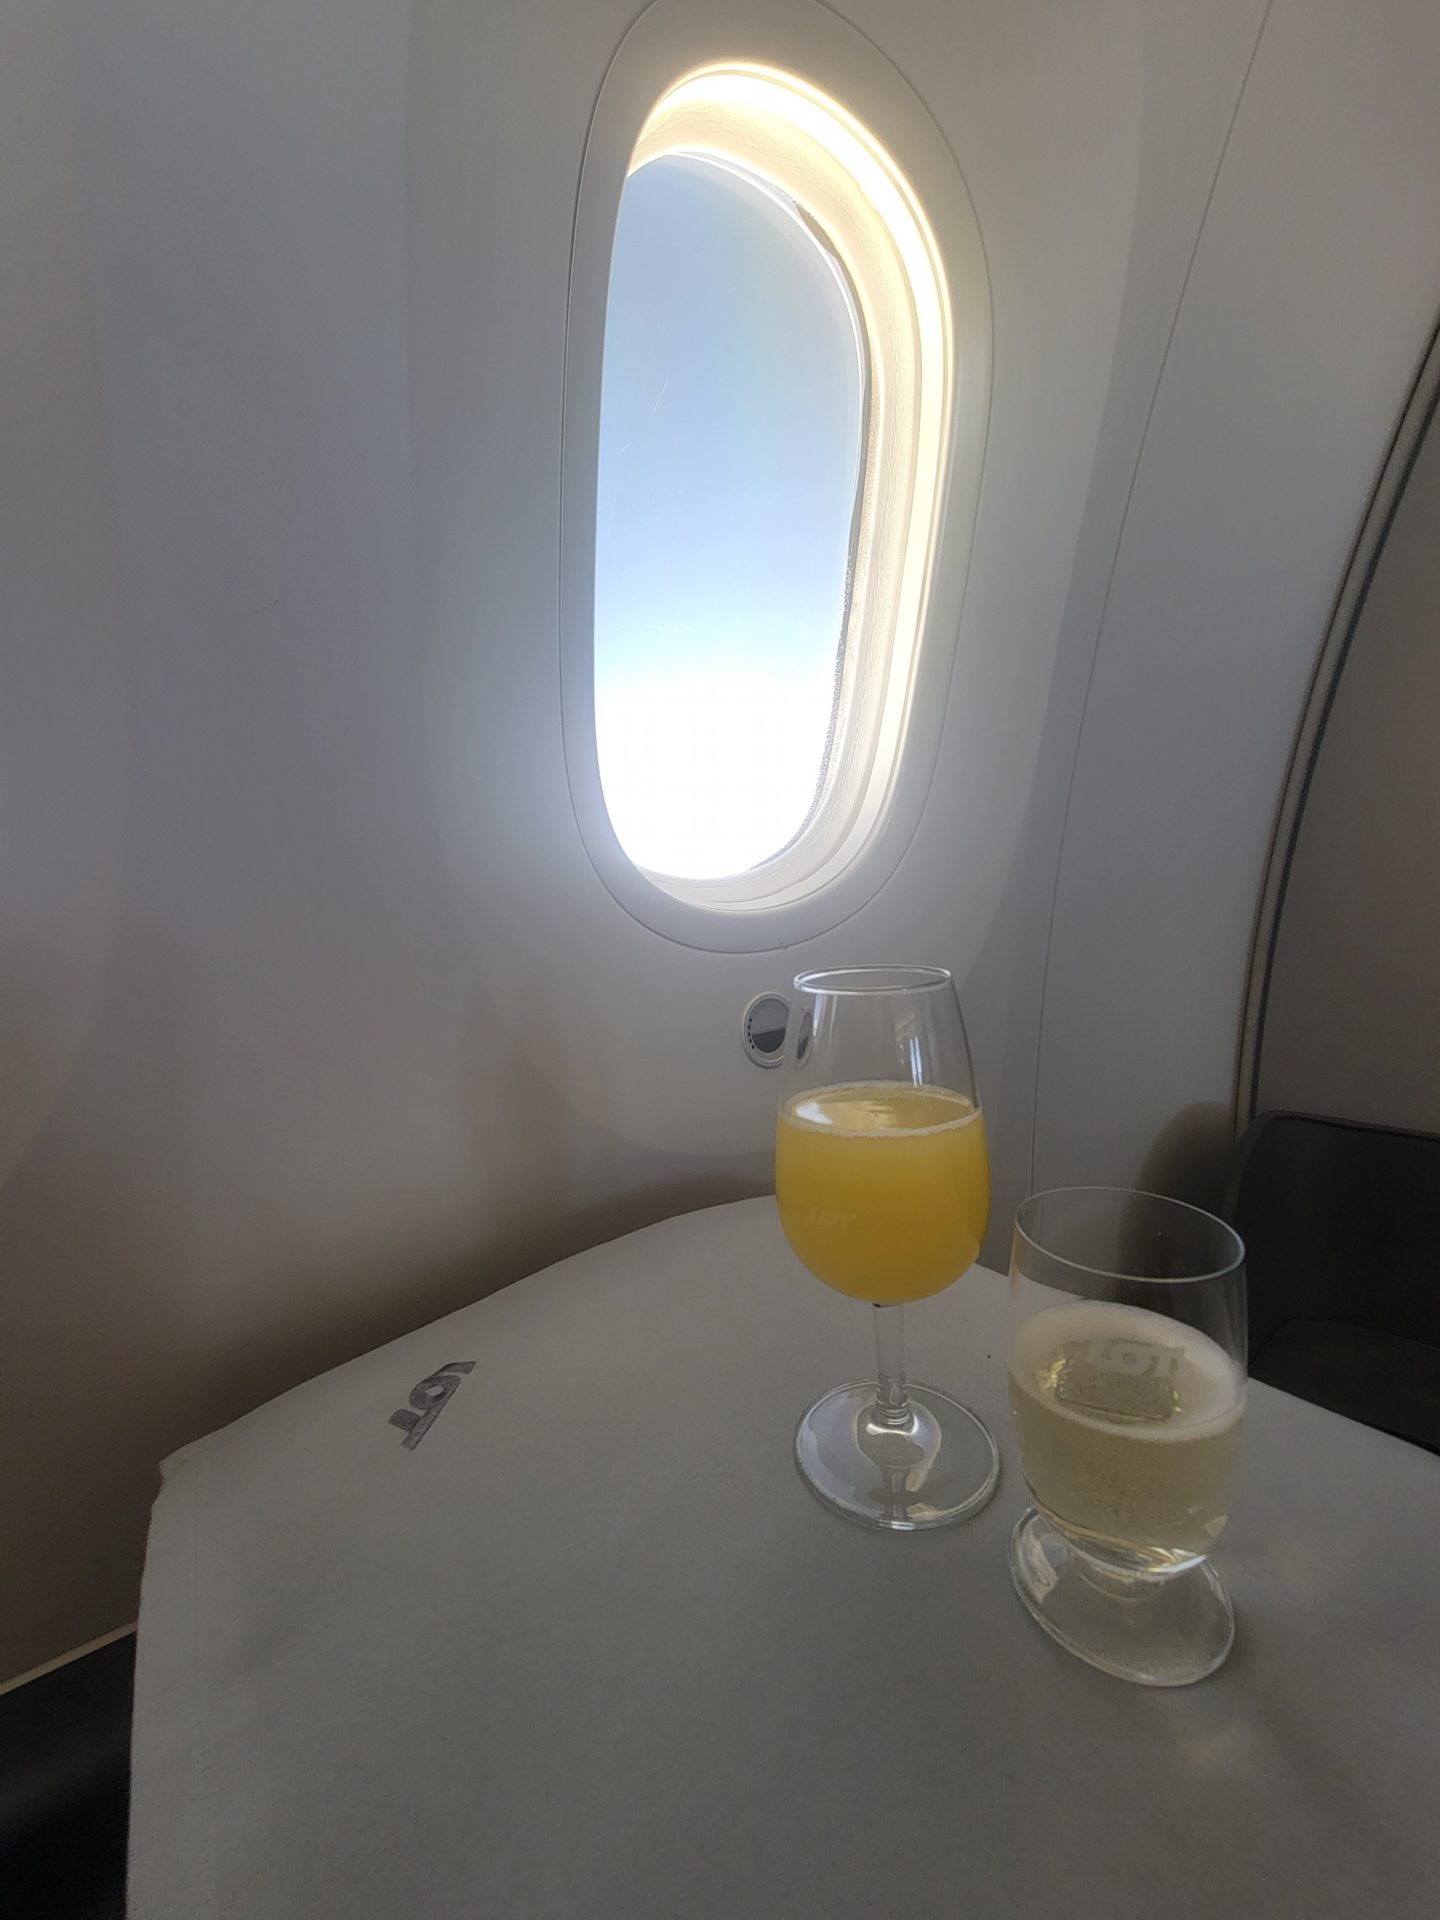 a glass of orange juice and a drink on a table in an airplane